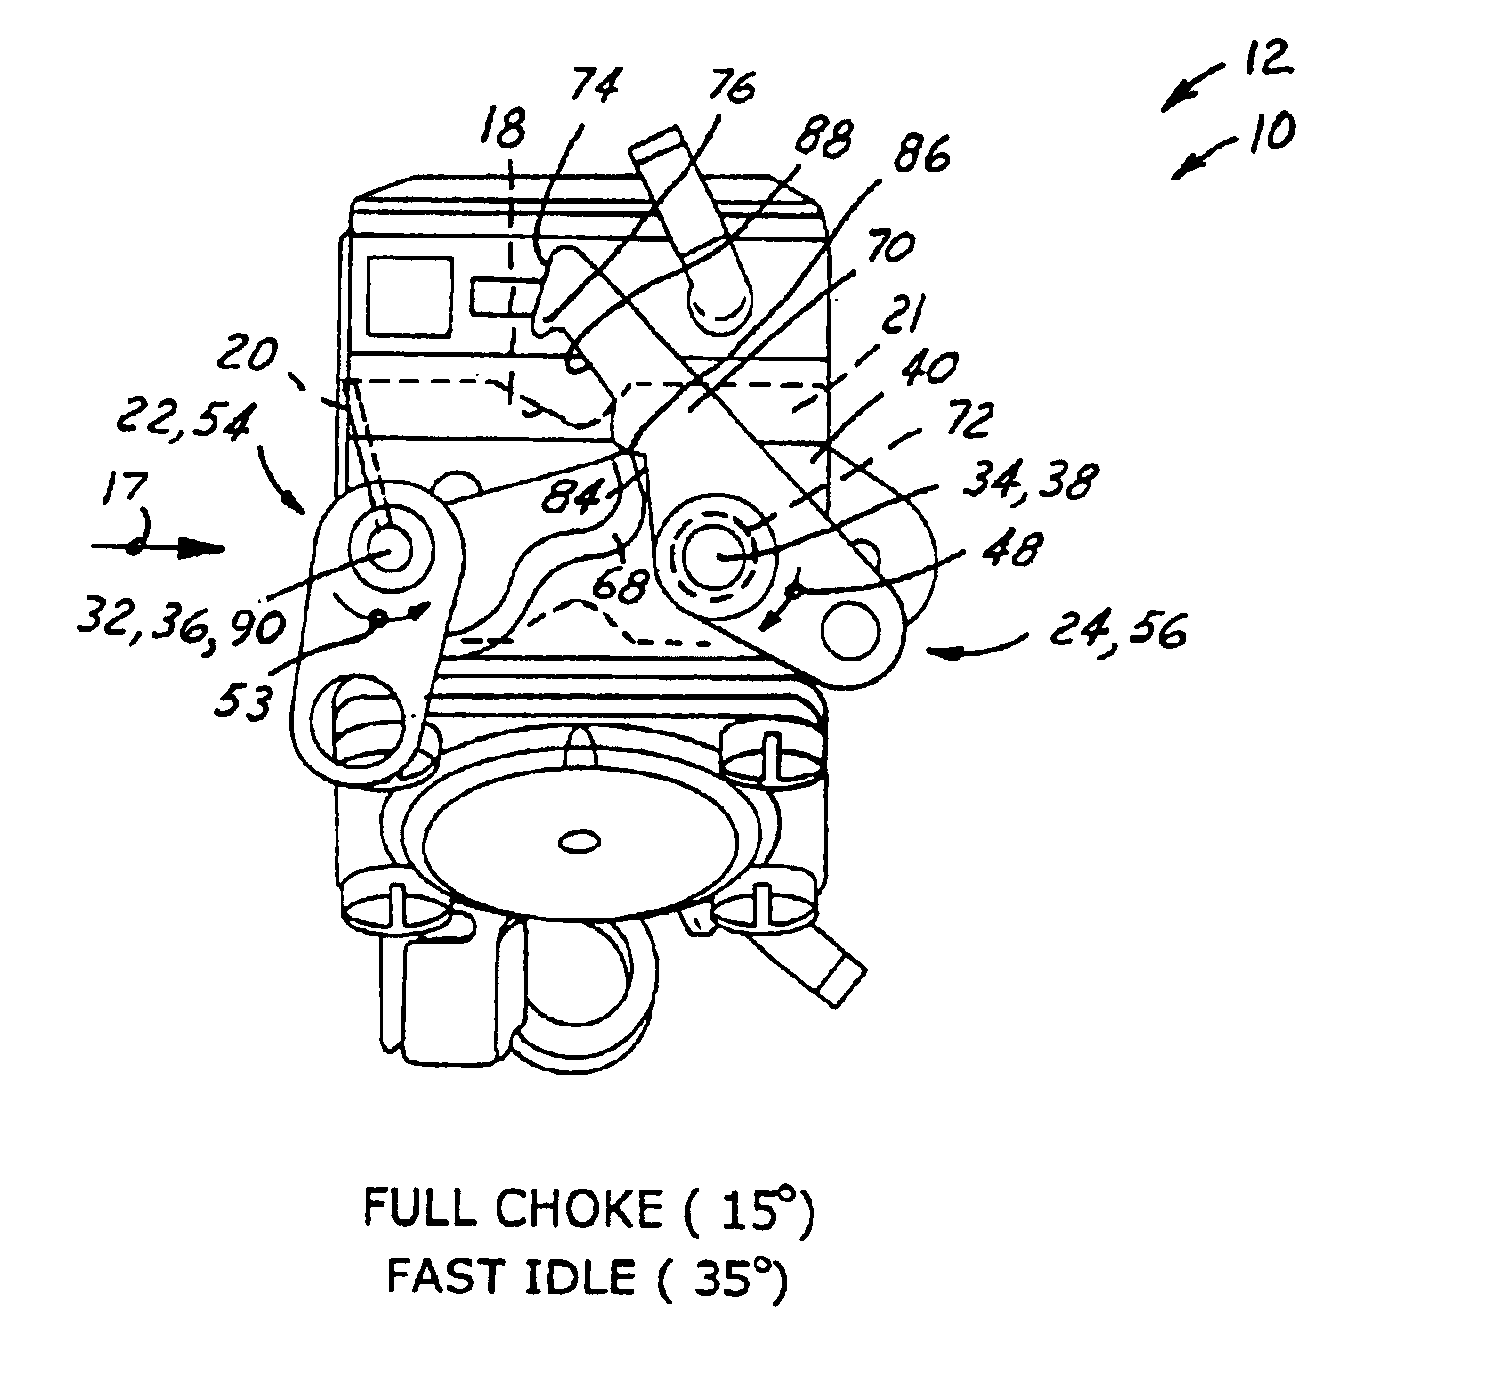 Self-relieving choke starting system for a combustion engine carburetor